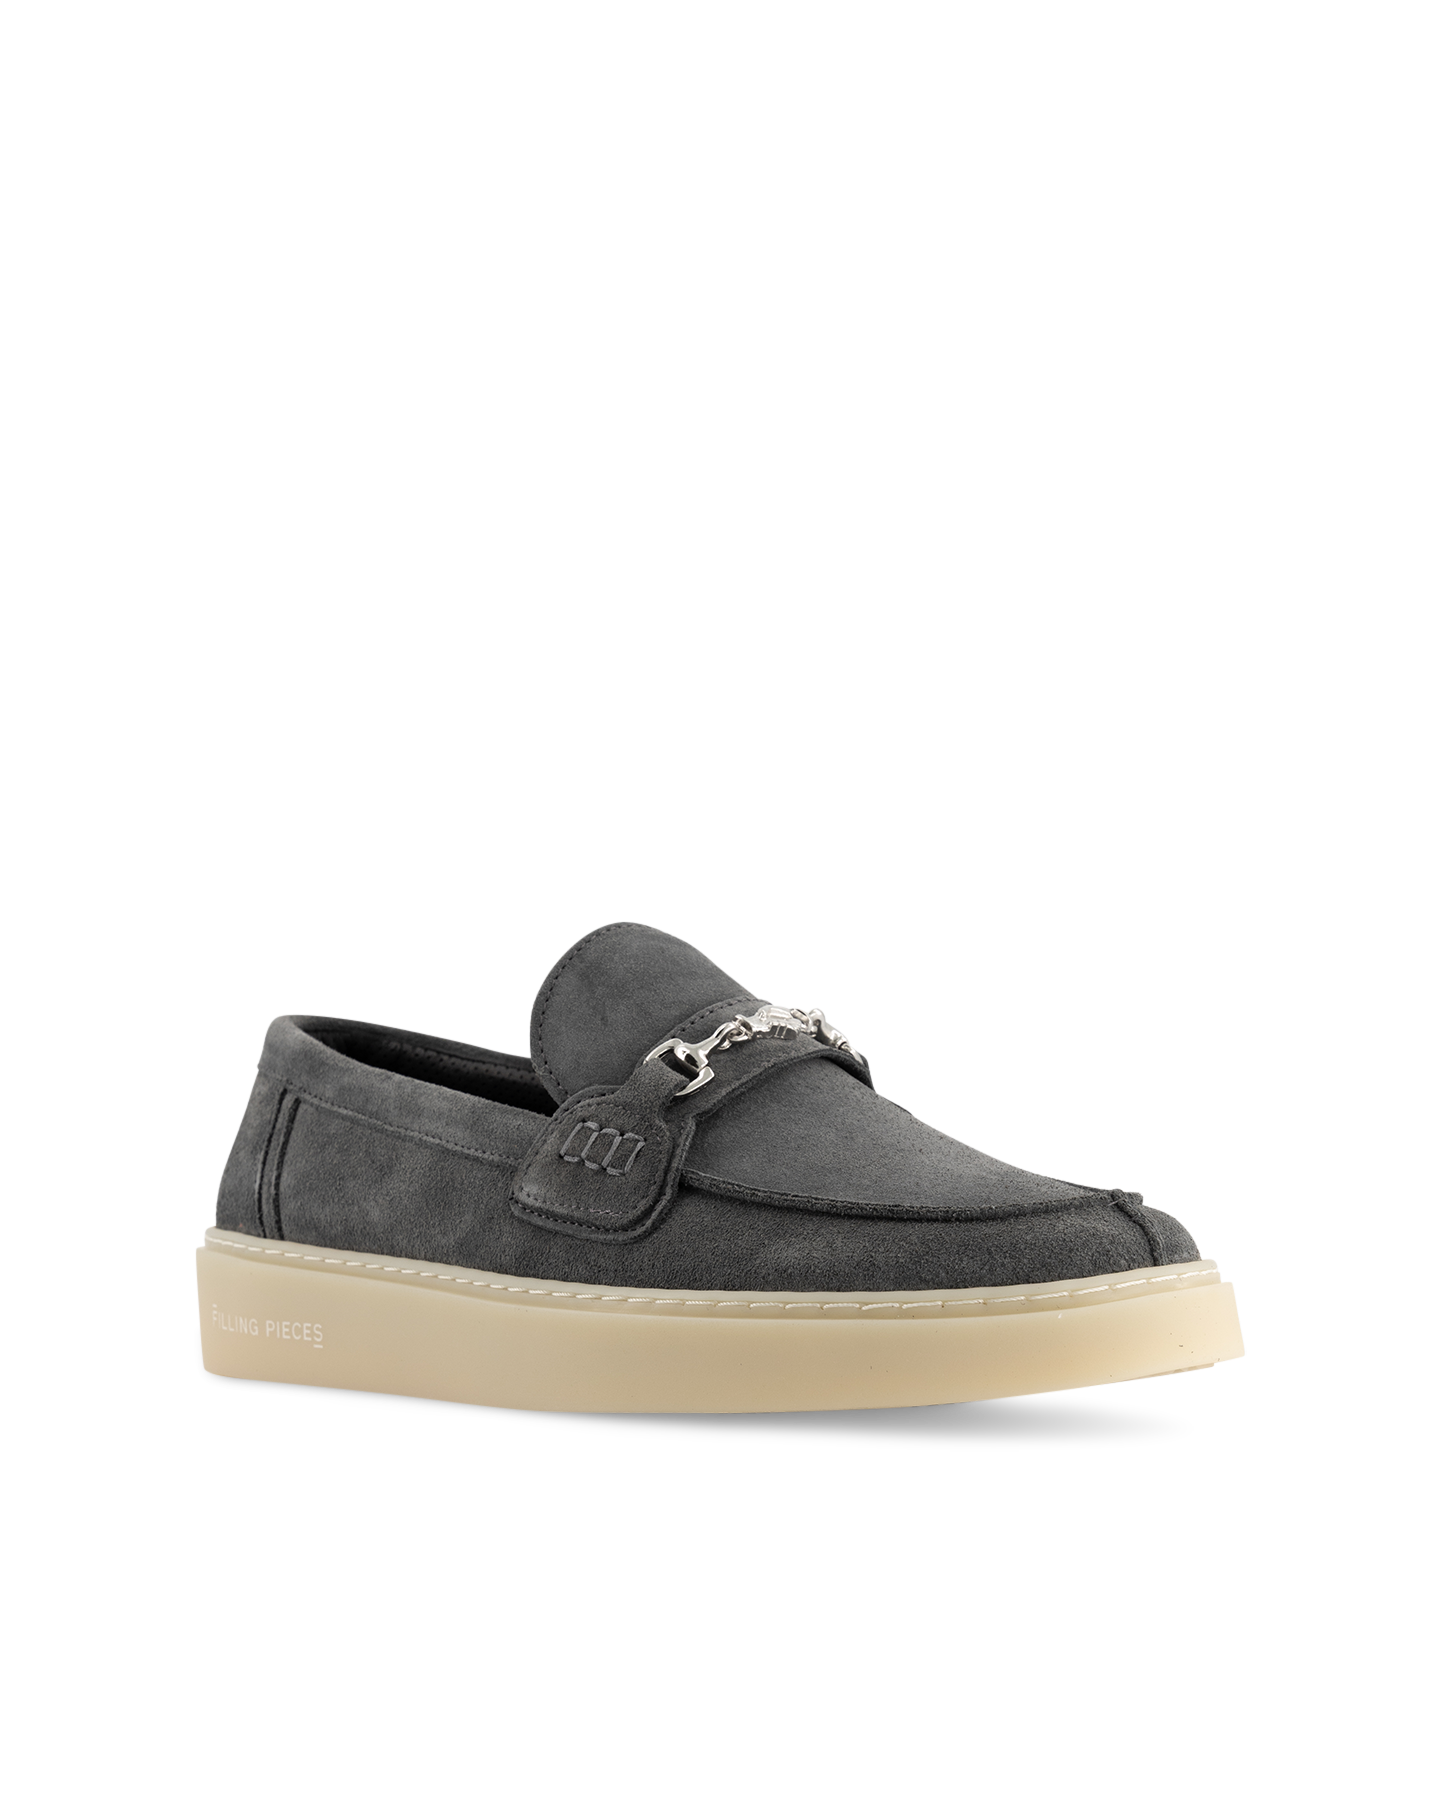 Filling Pieces Core Loafer Suede Dark Grey DONKERGRIJS 2